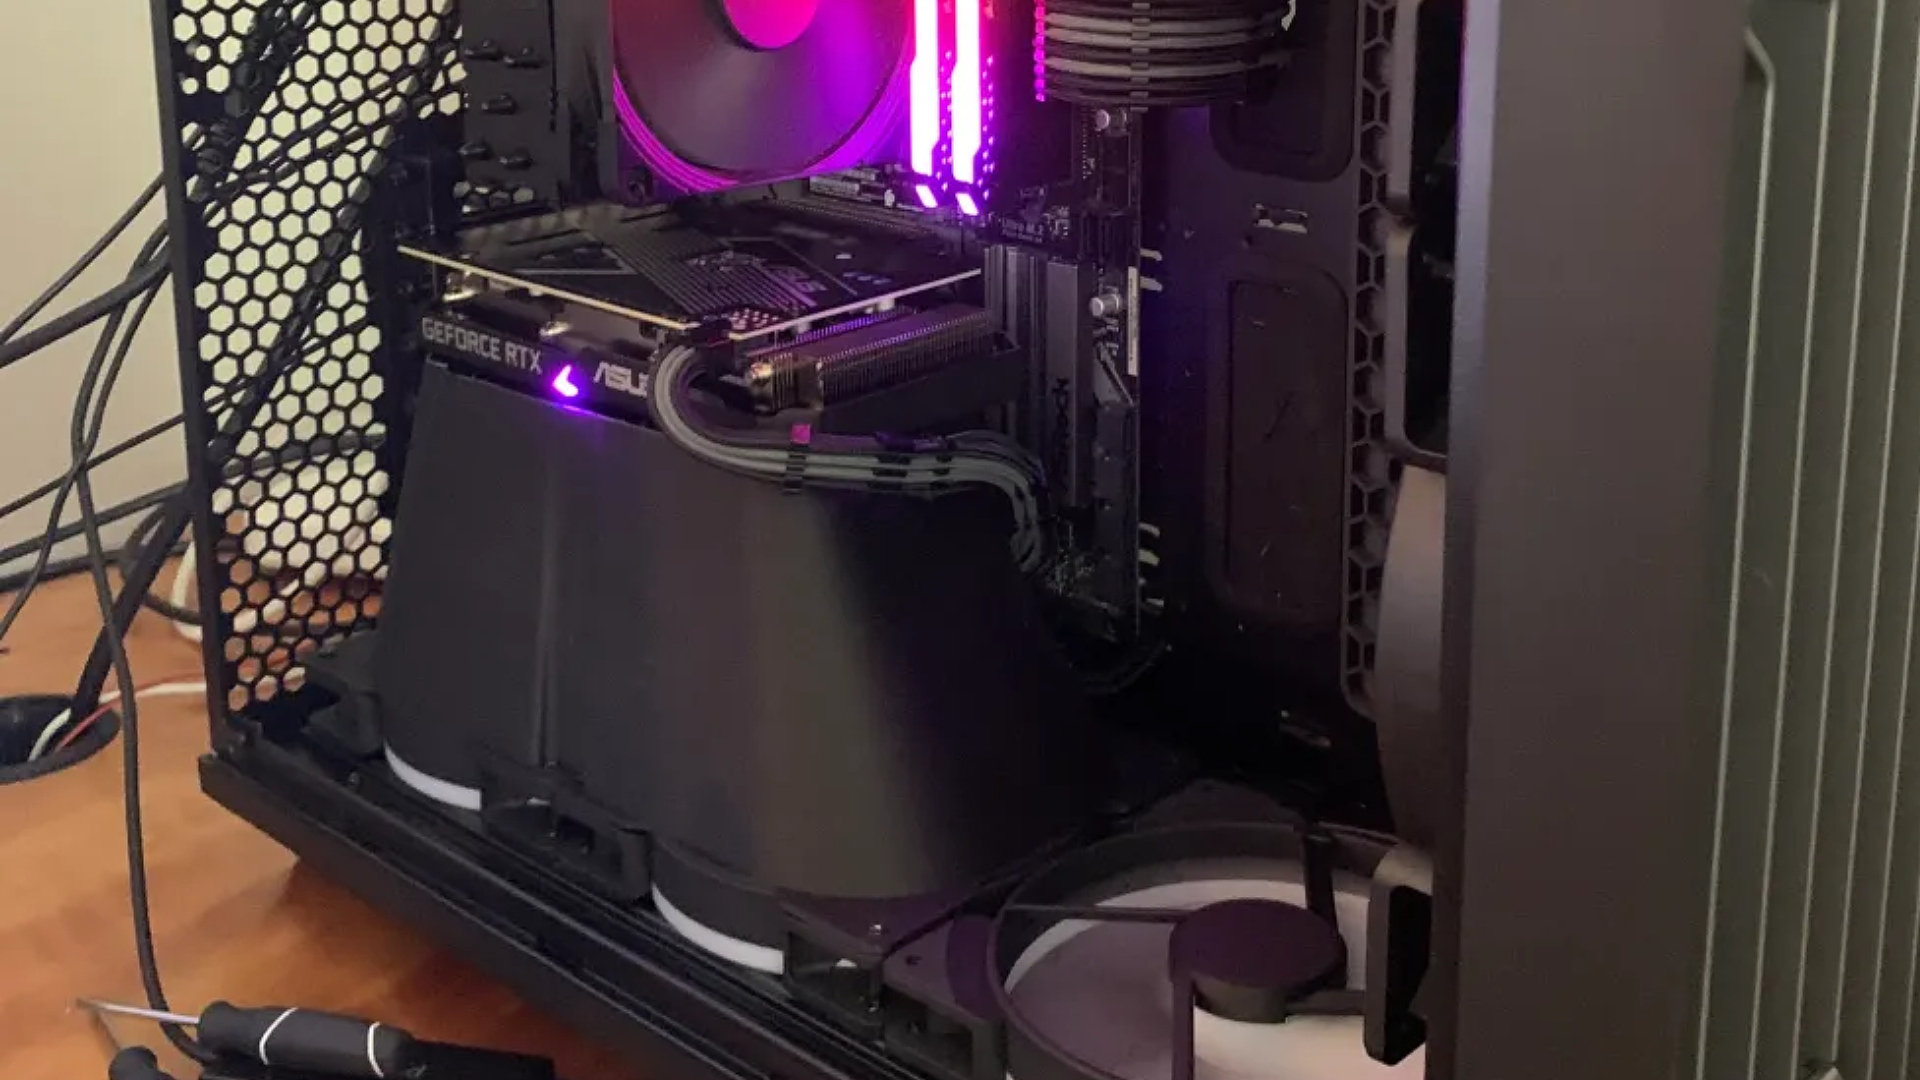 3D Printed gaming PC mod within Fractal case with Asus Nvidia RTX 3060 GPU on top and RGB RAM in view